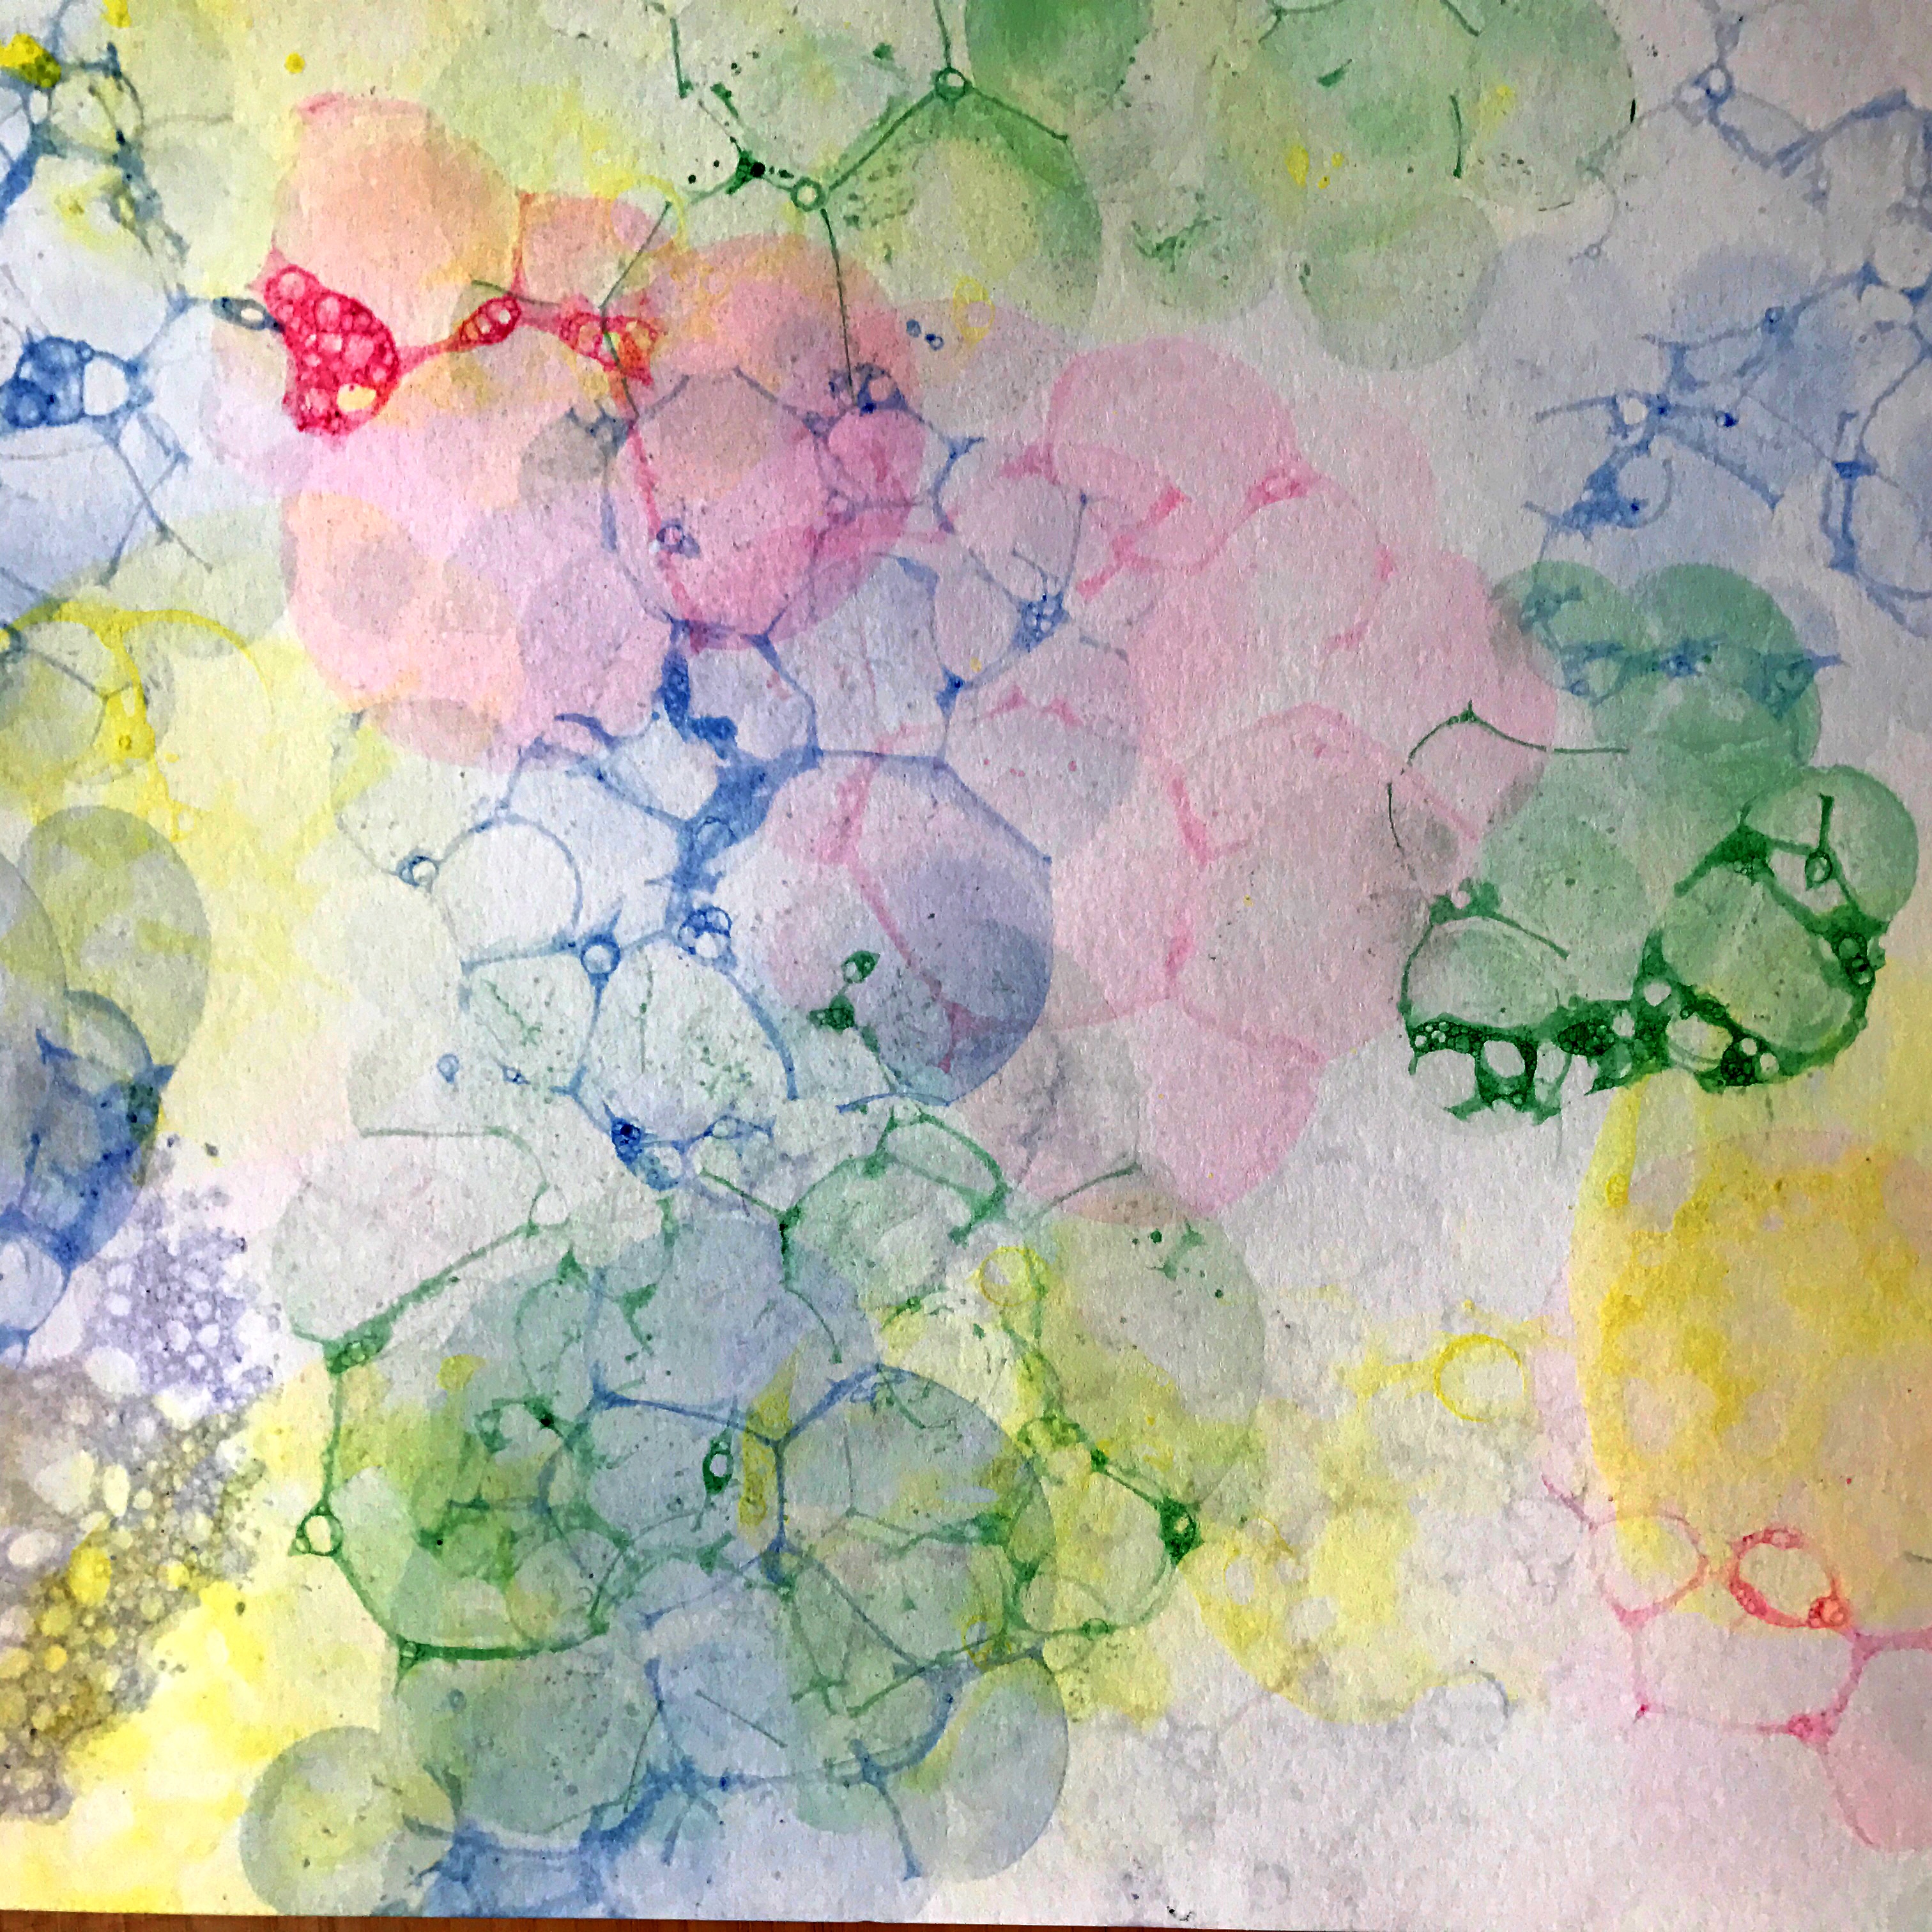 How to: Bubble Painting - Magic Garden